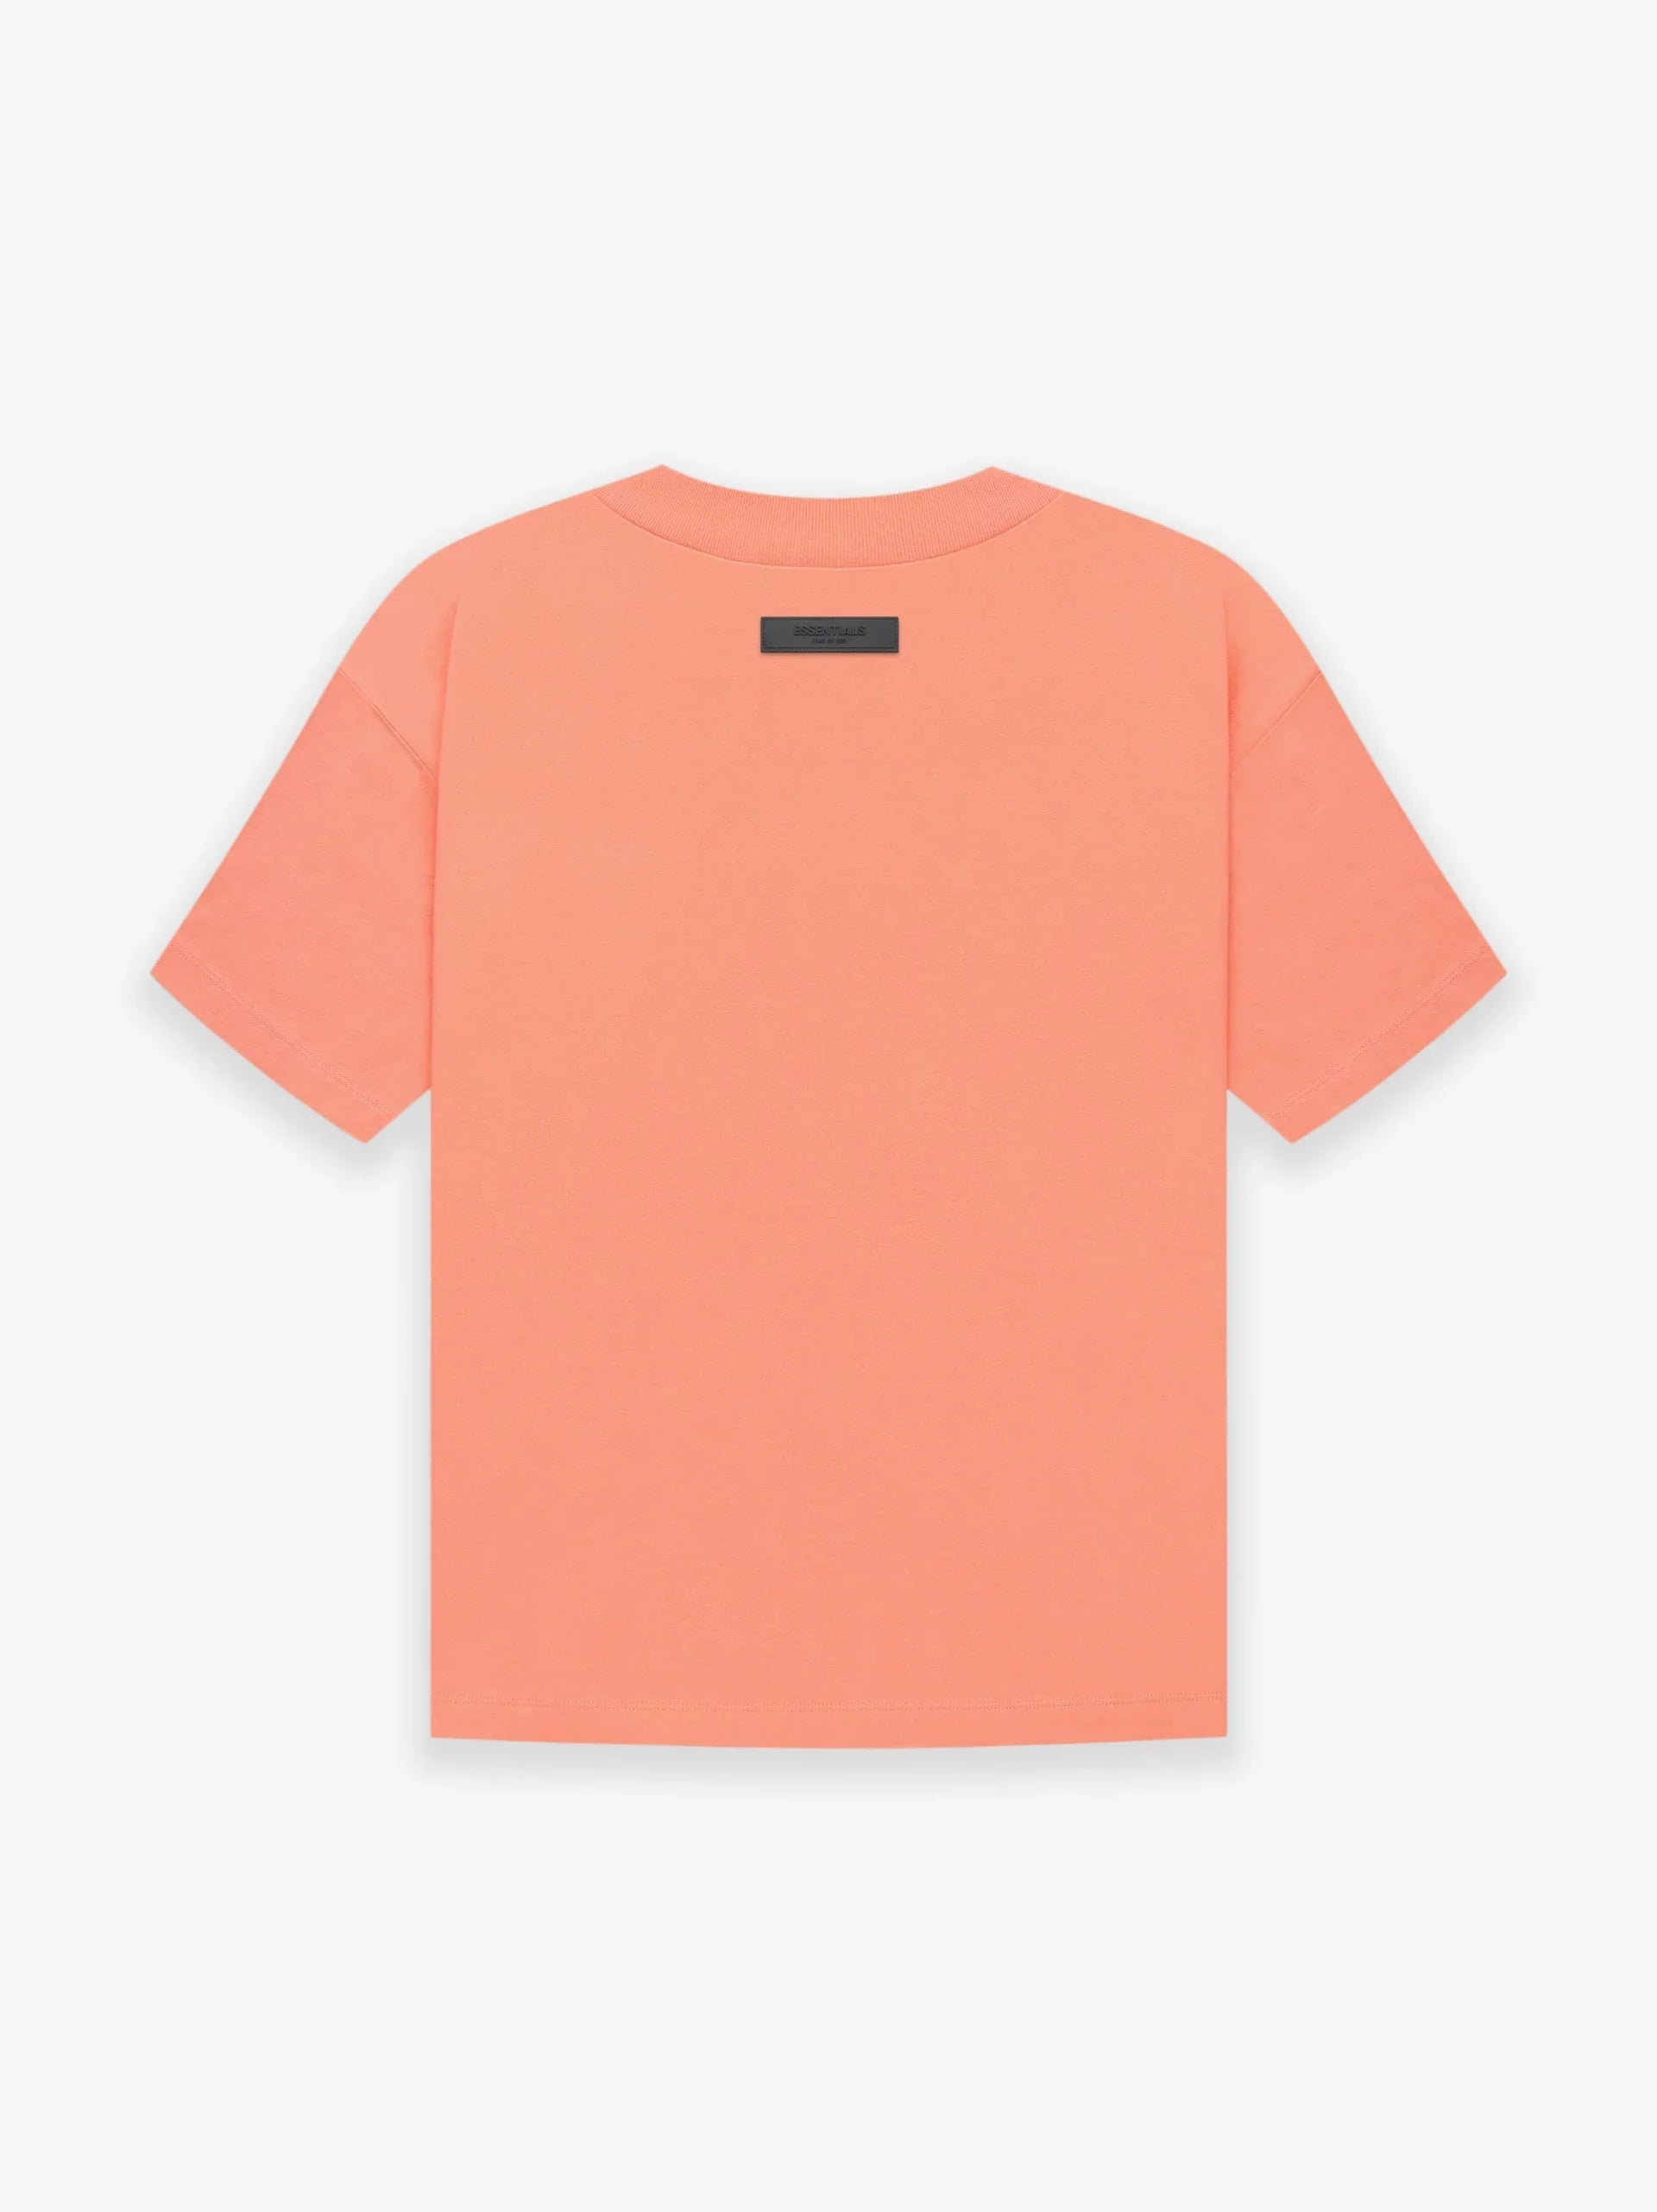 ESSENTIALS JERSEY SS TEE CORAL - Gravity NYC